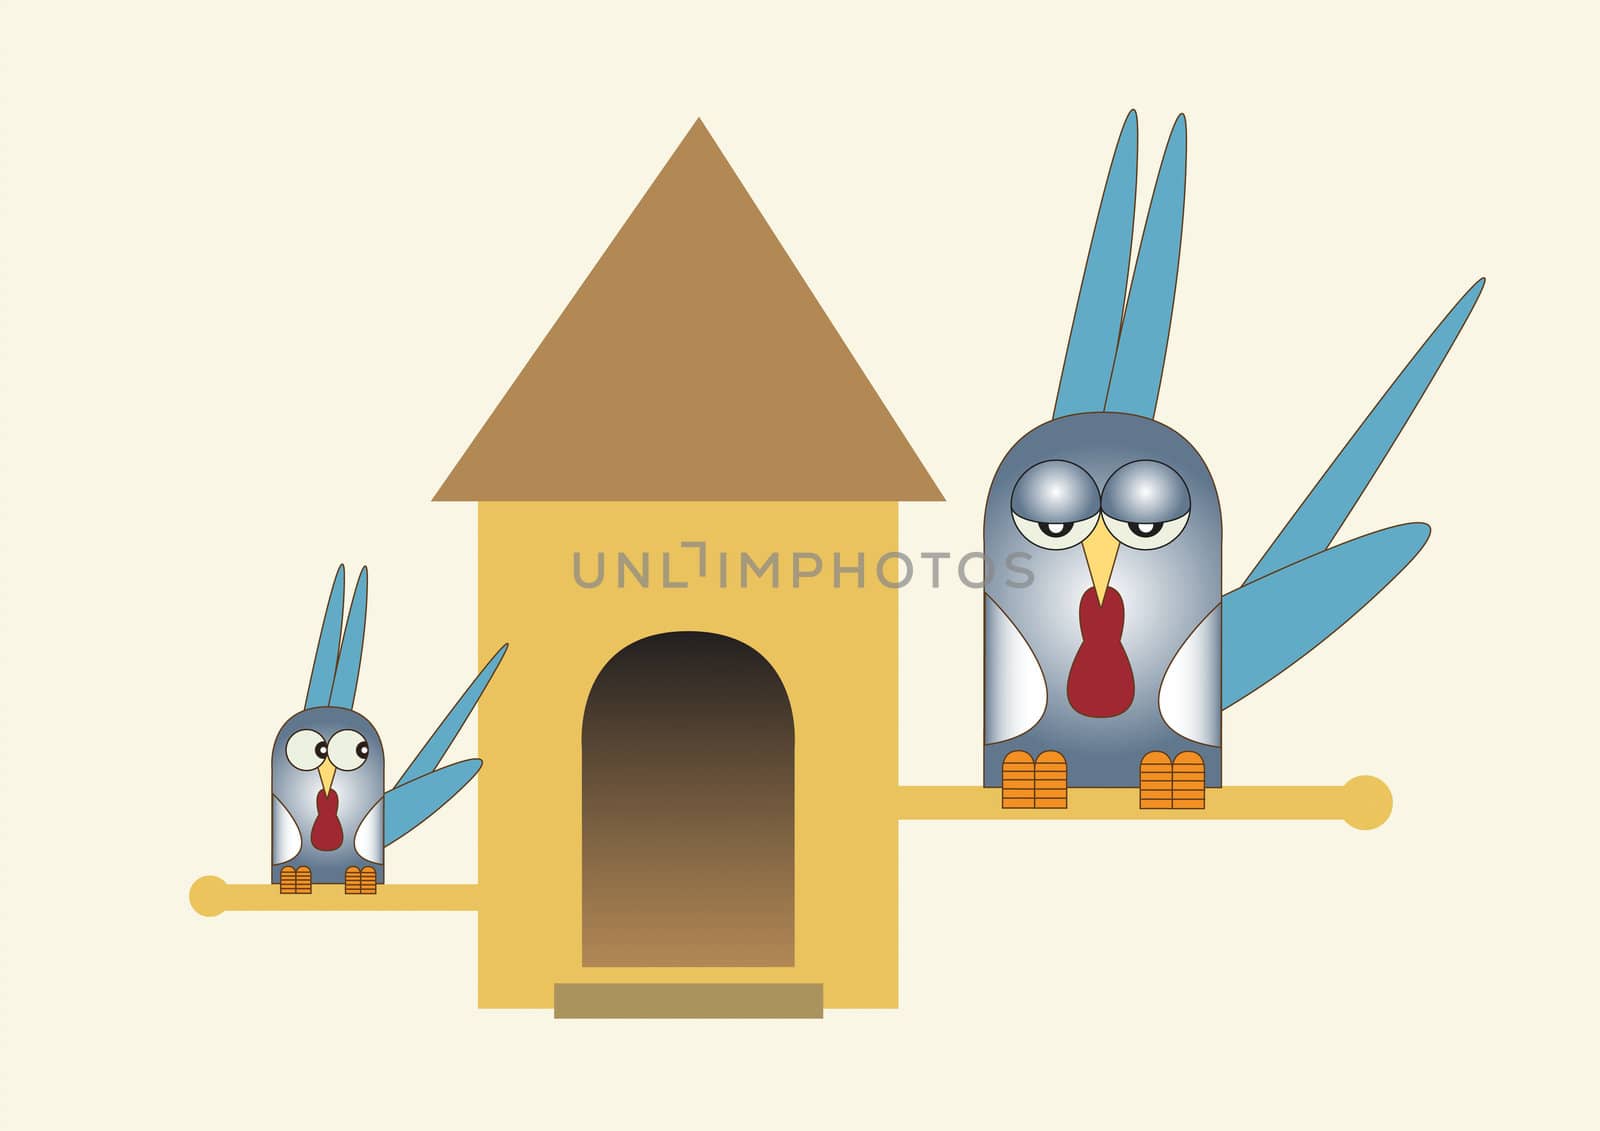 A Hand drawn Illustration of two blue coloured stylized birds with blue head and tail feathers, perched either side of a bird house, set on a plain cream background.